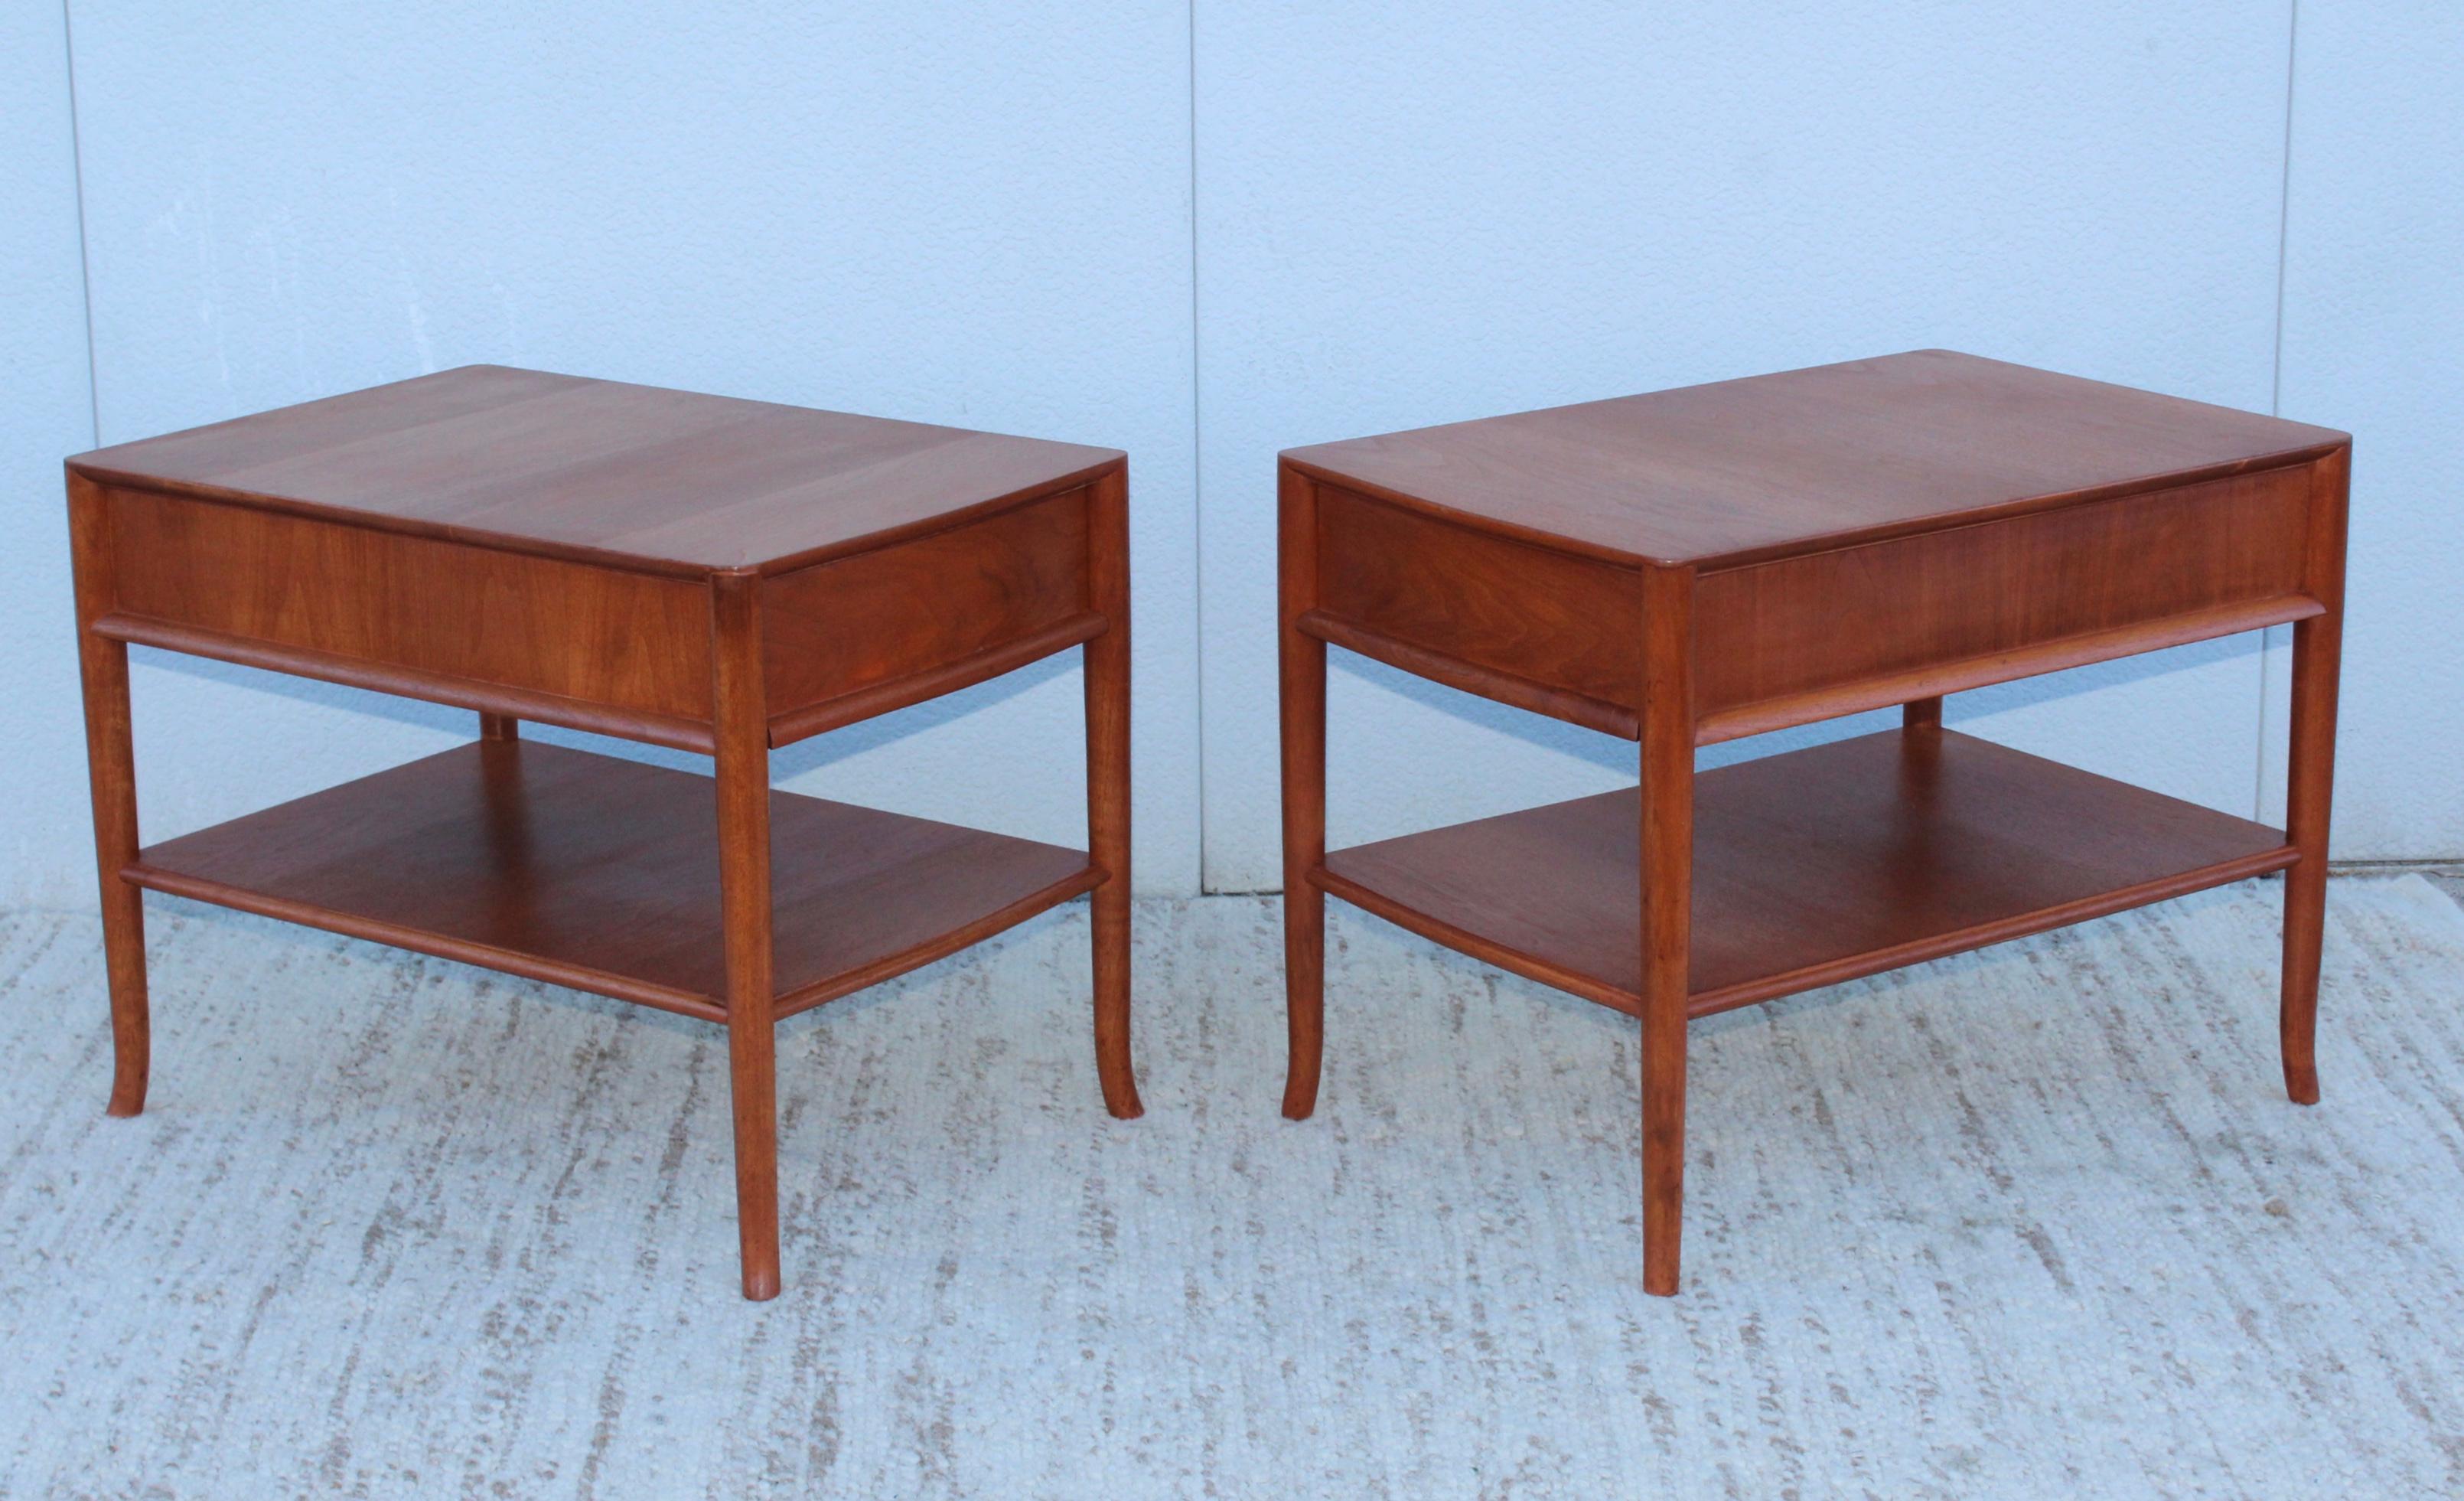 Rare pair of 1950s T.H. Robsjohn-Gibbings for Widdicomb model 3342 bedside tables. Two tear with single drawer and sabre legs.